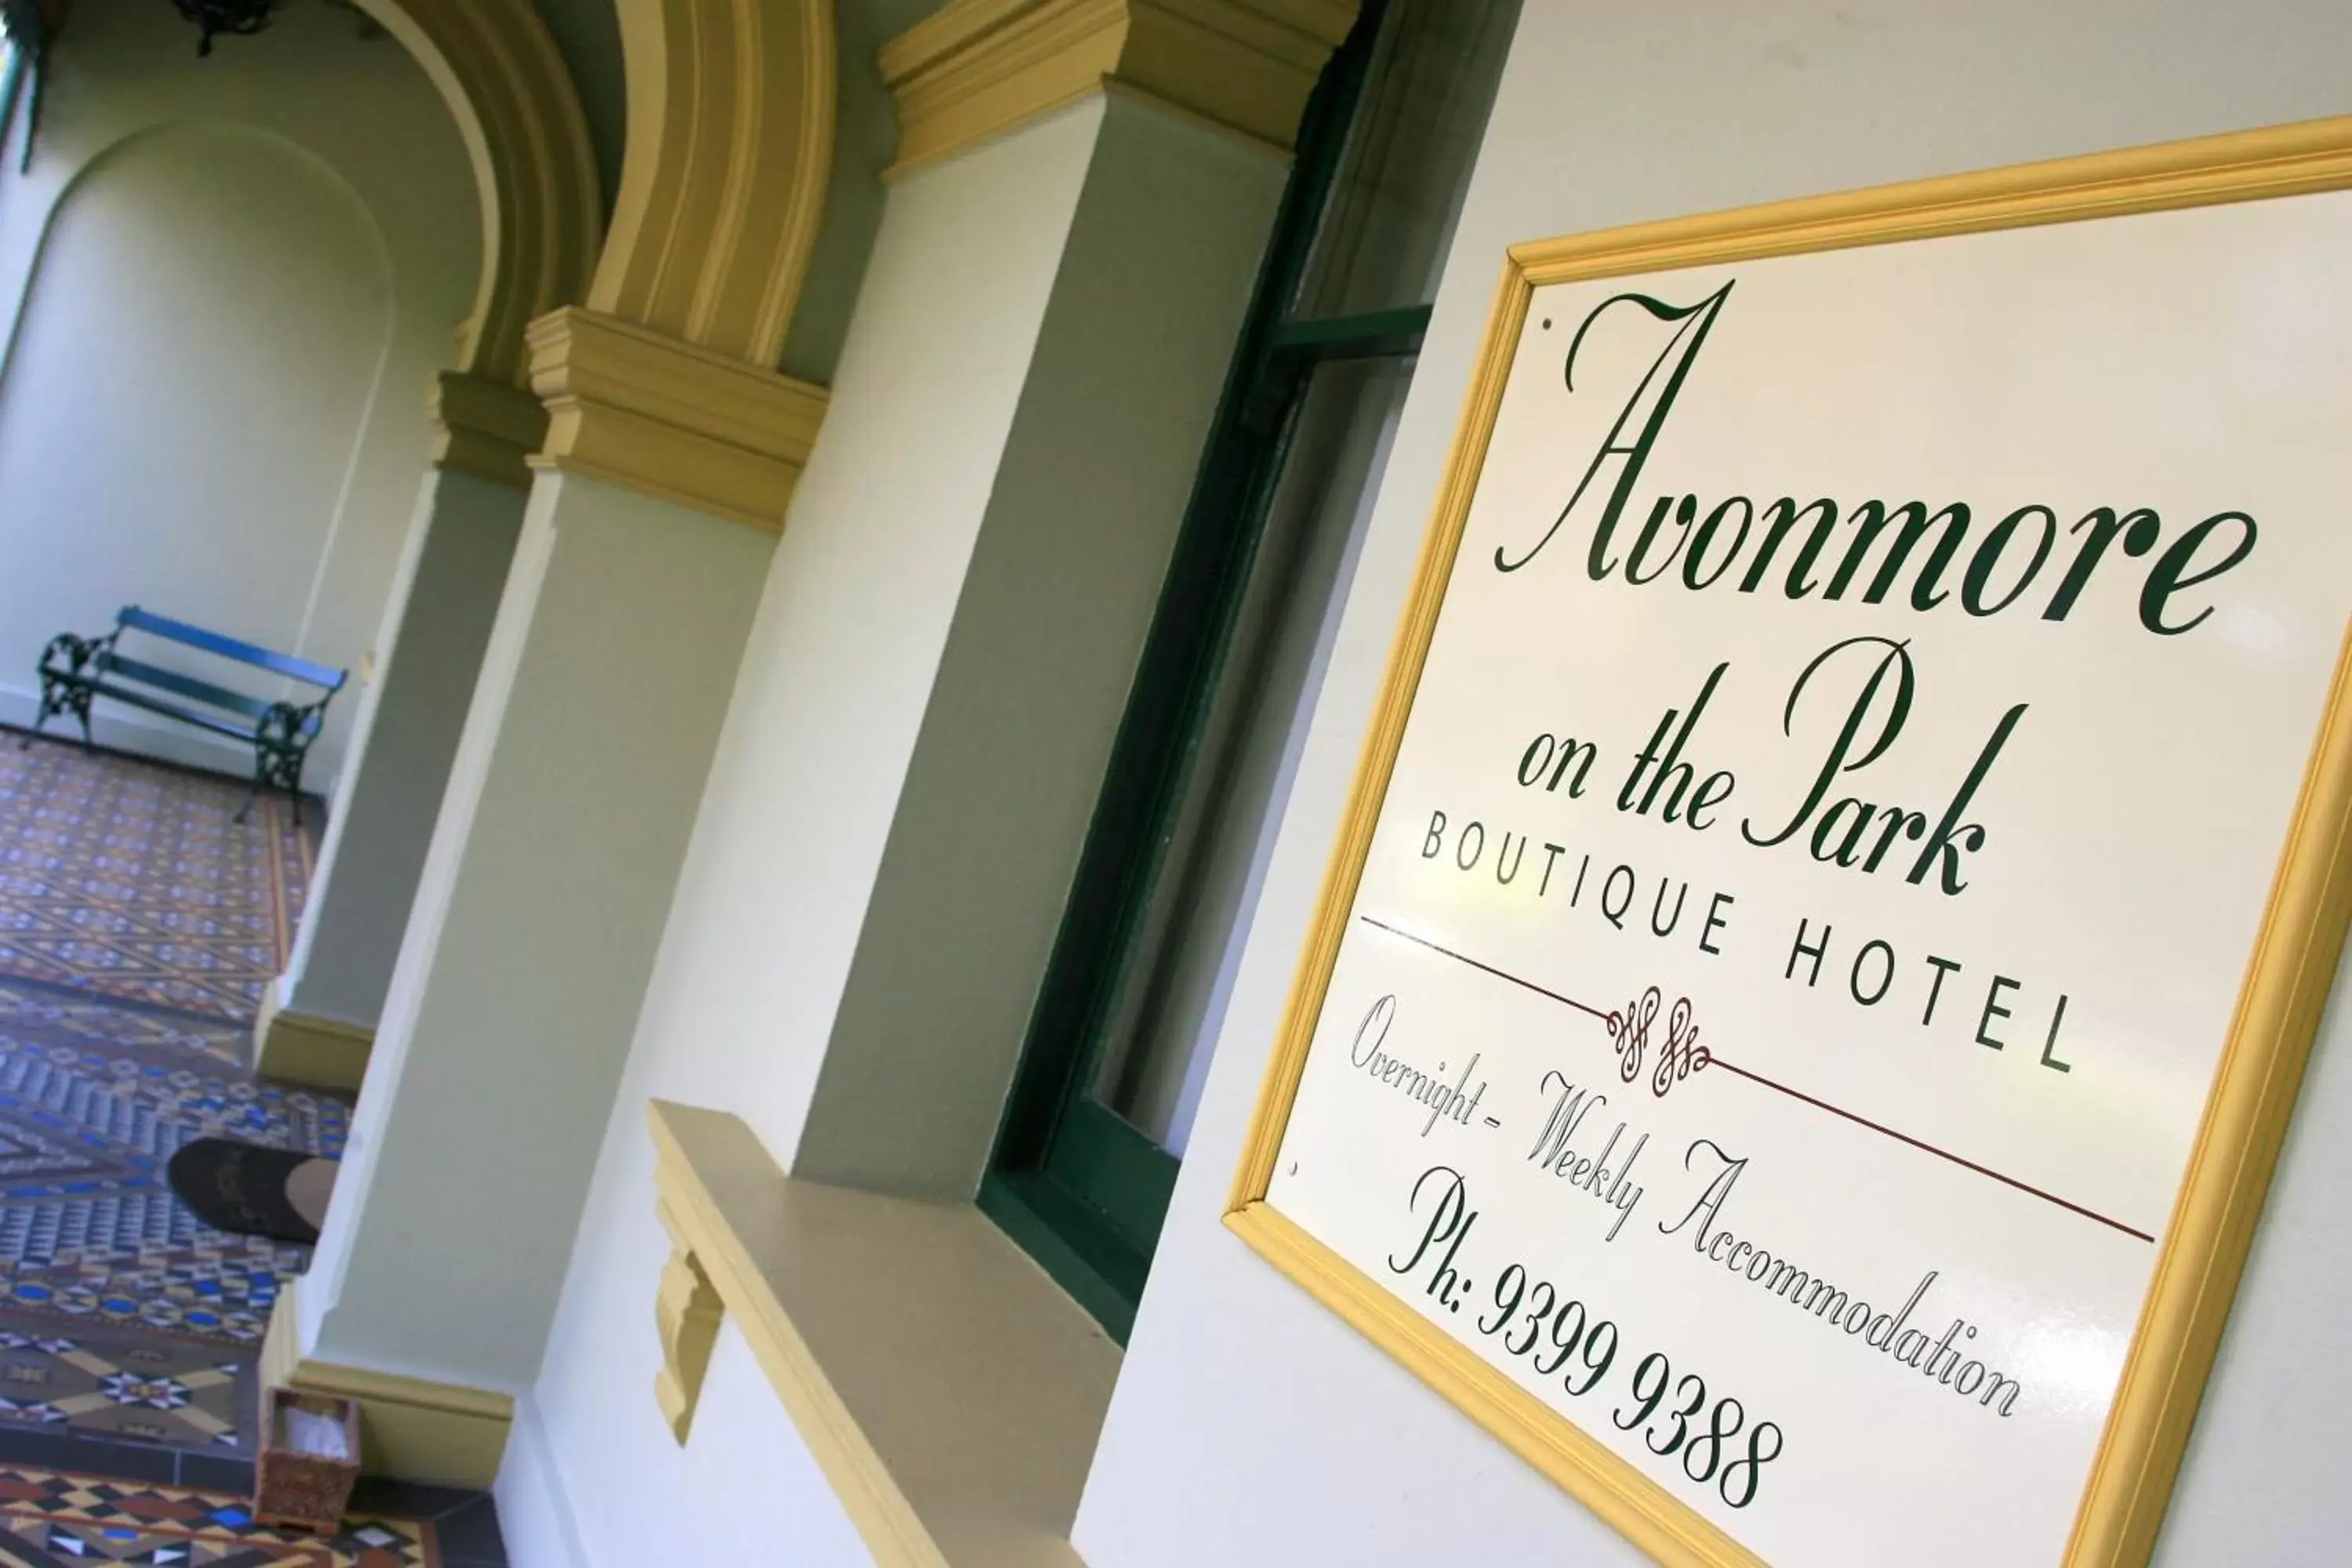 Property logo or sign in Avonmore On The Park Boutique Hotel